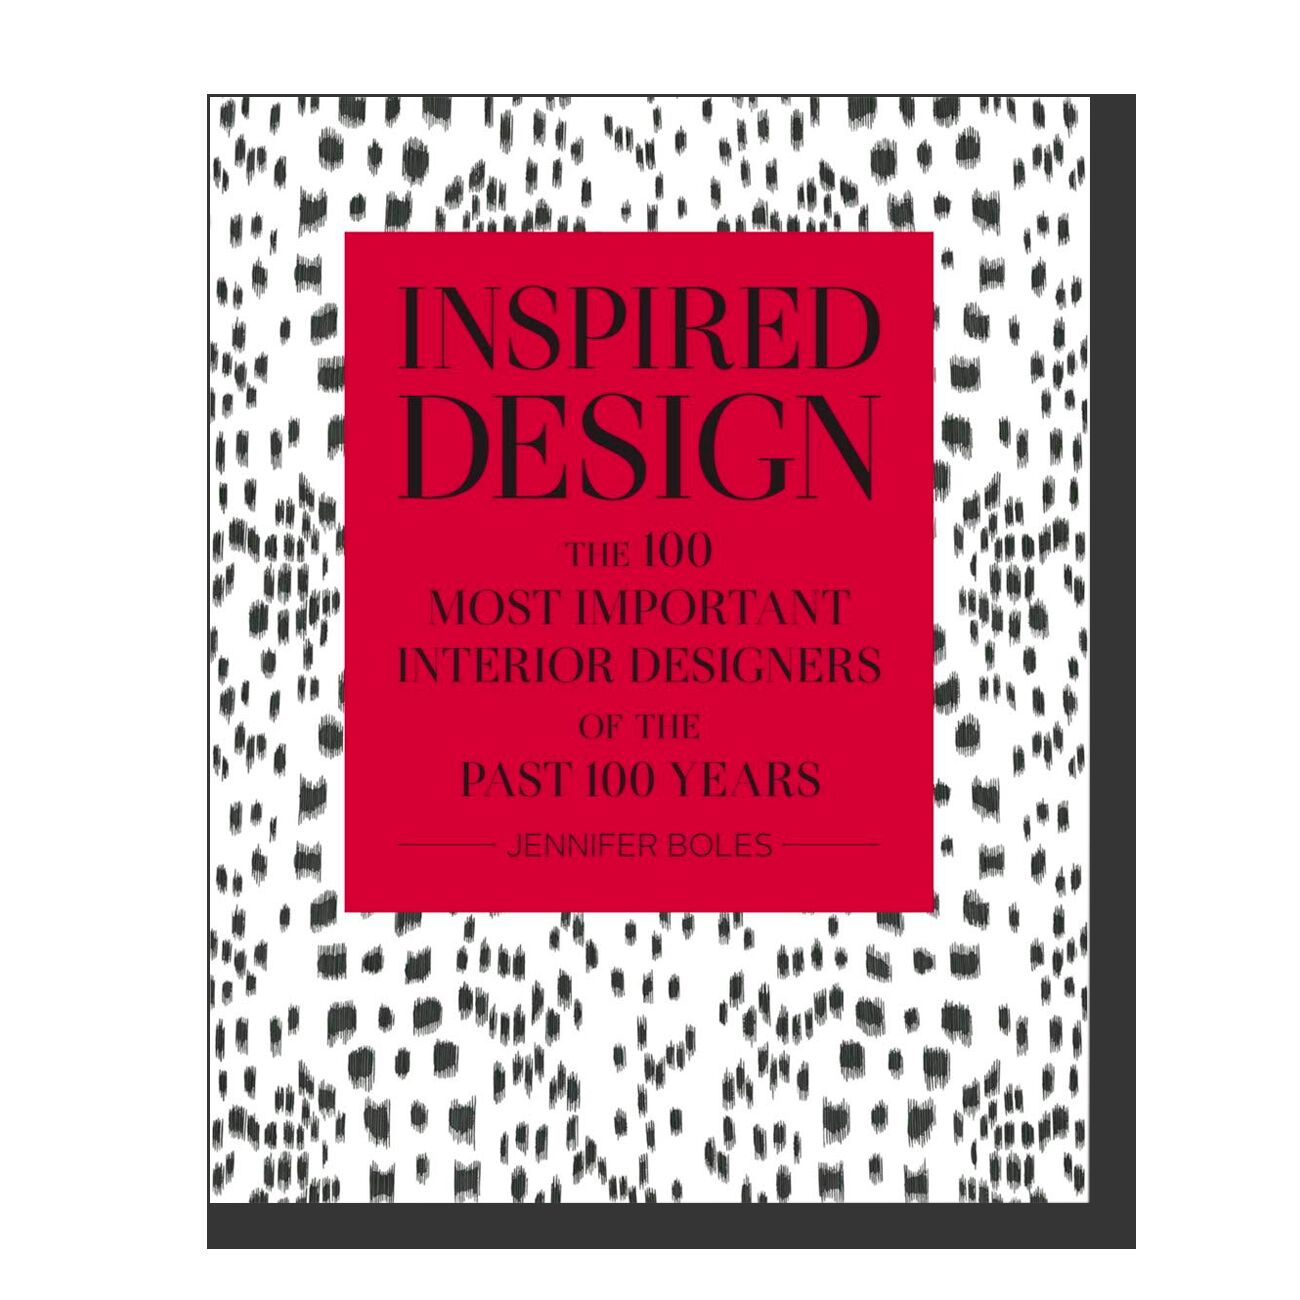 Inspired Design: The 100 Most Important Interior Designers of The Past 100 Years